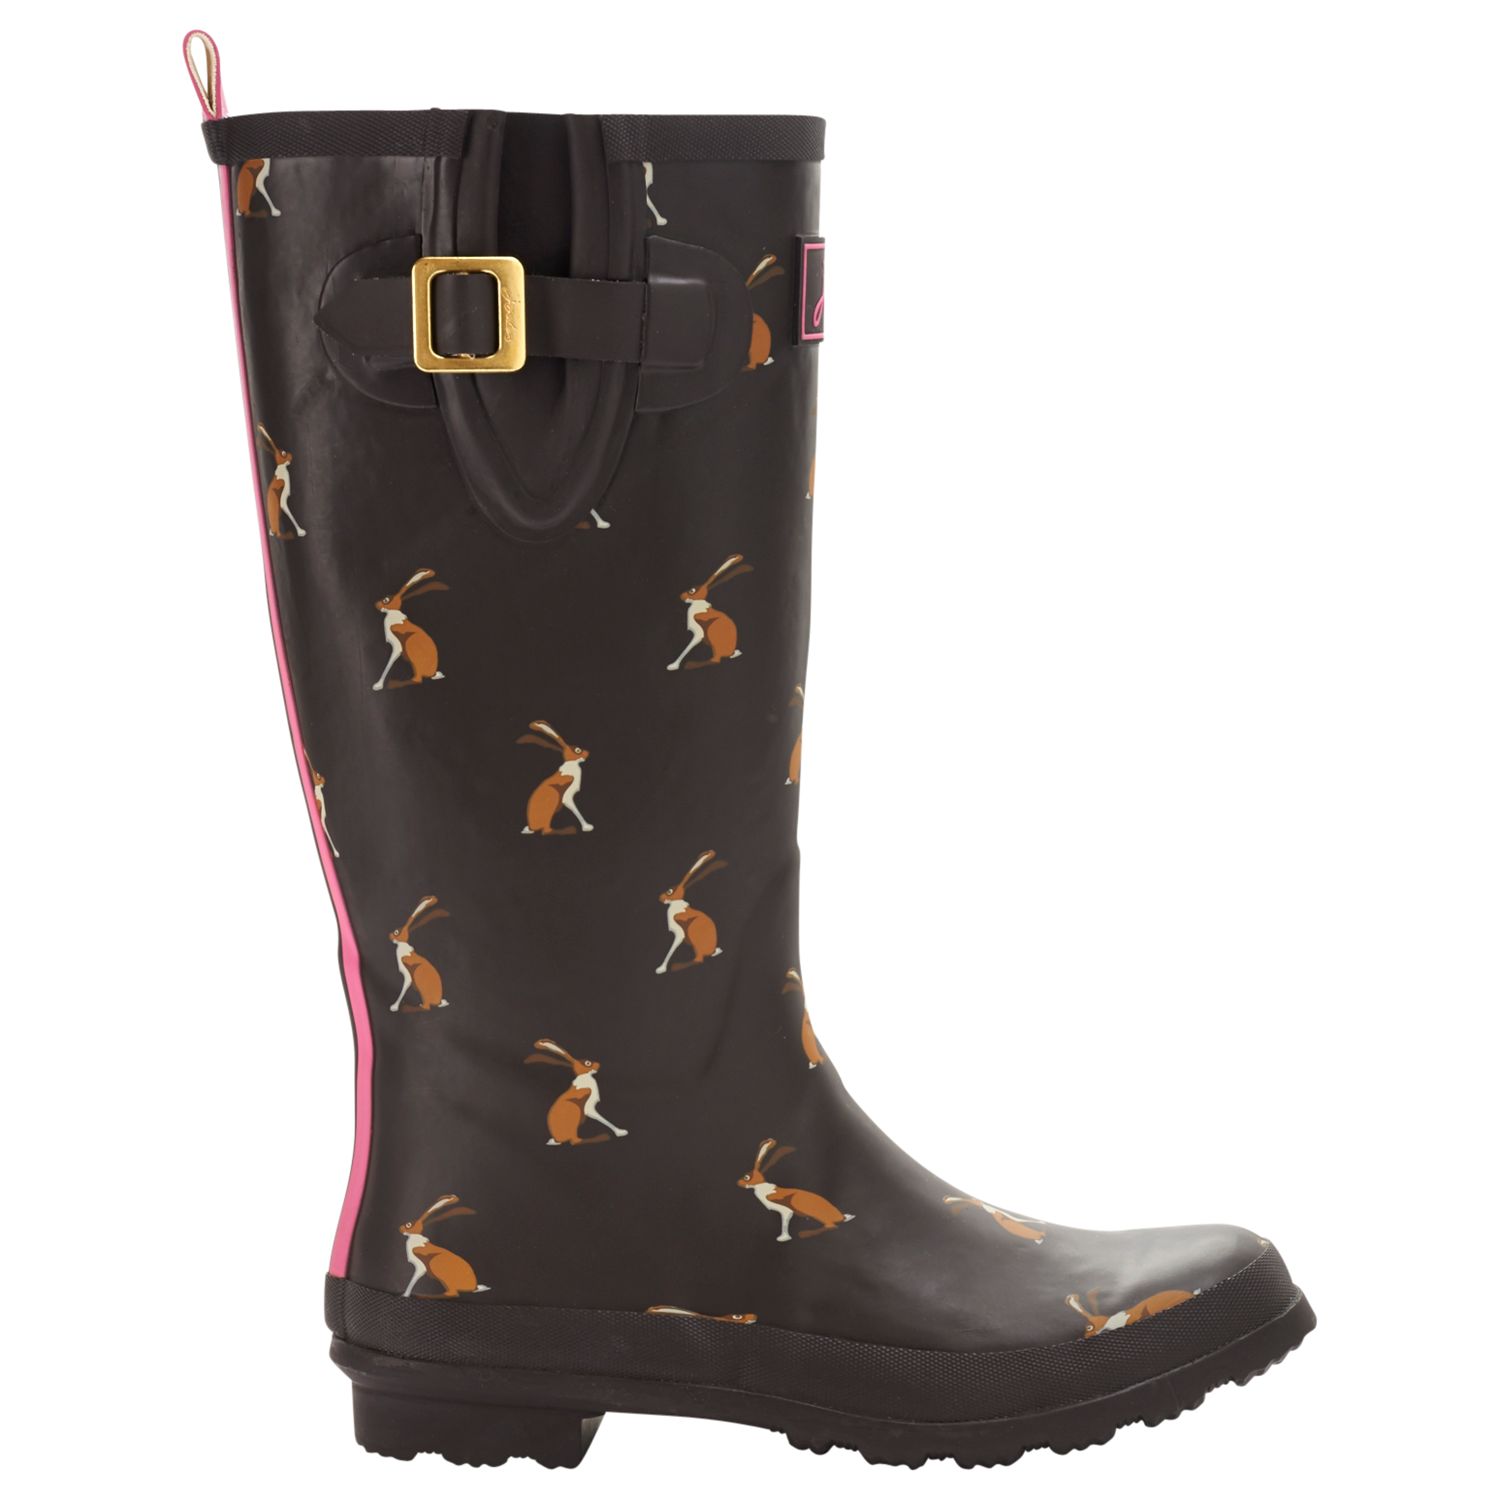 Joules Hare Print Wellington Boots, Brown